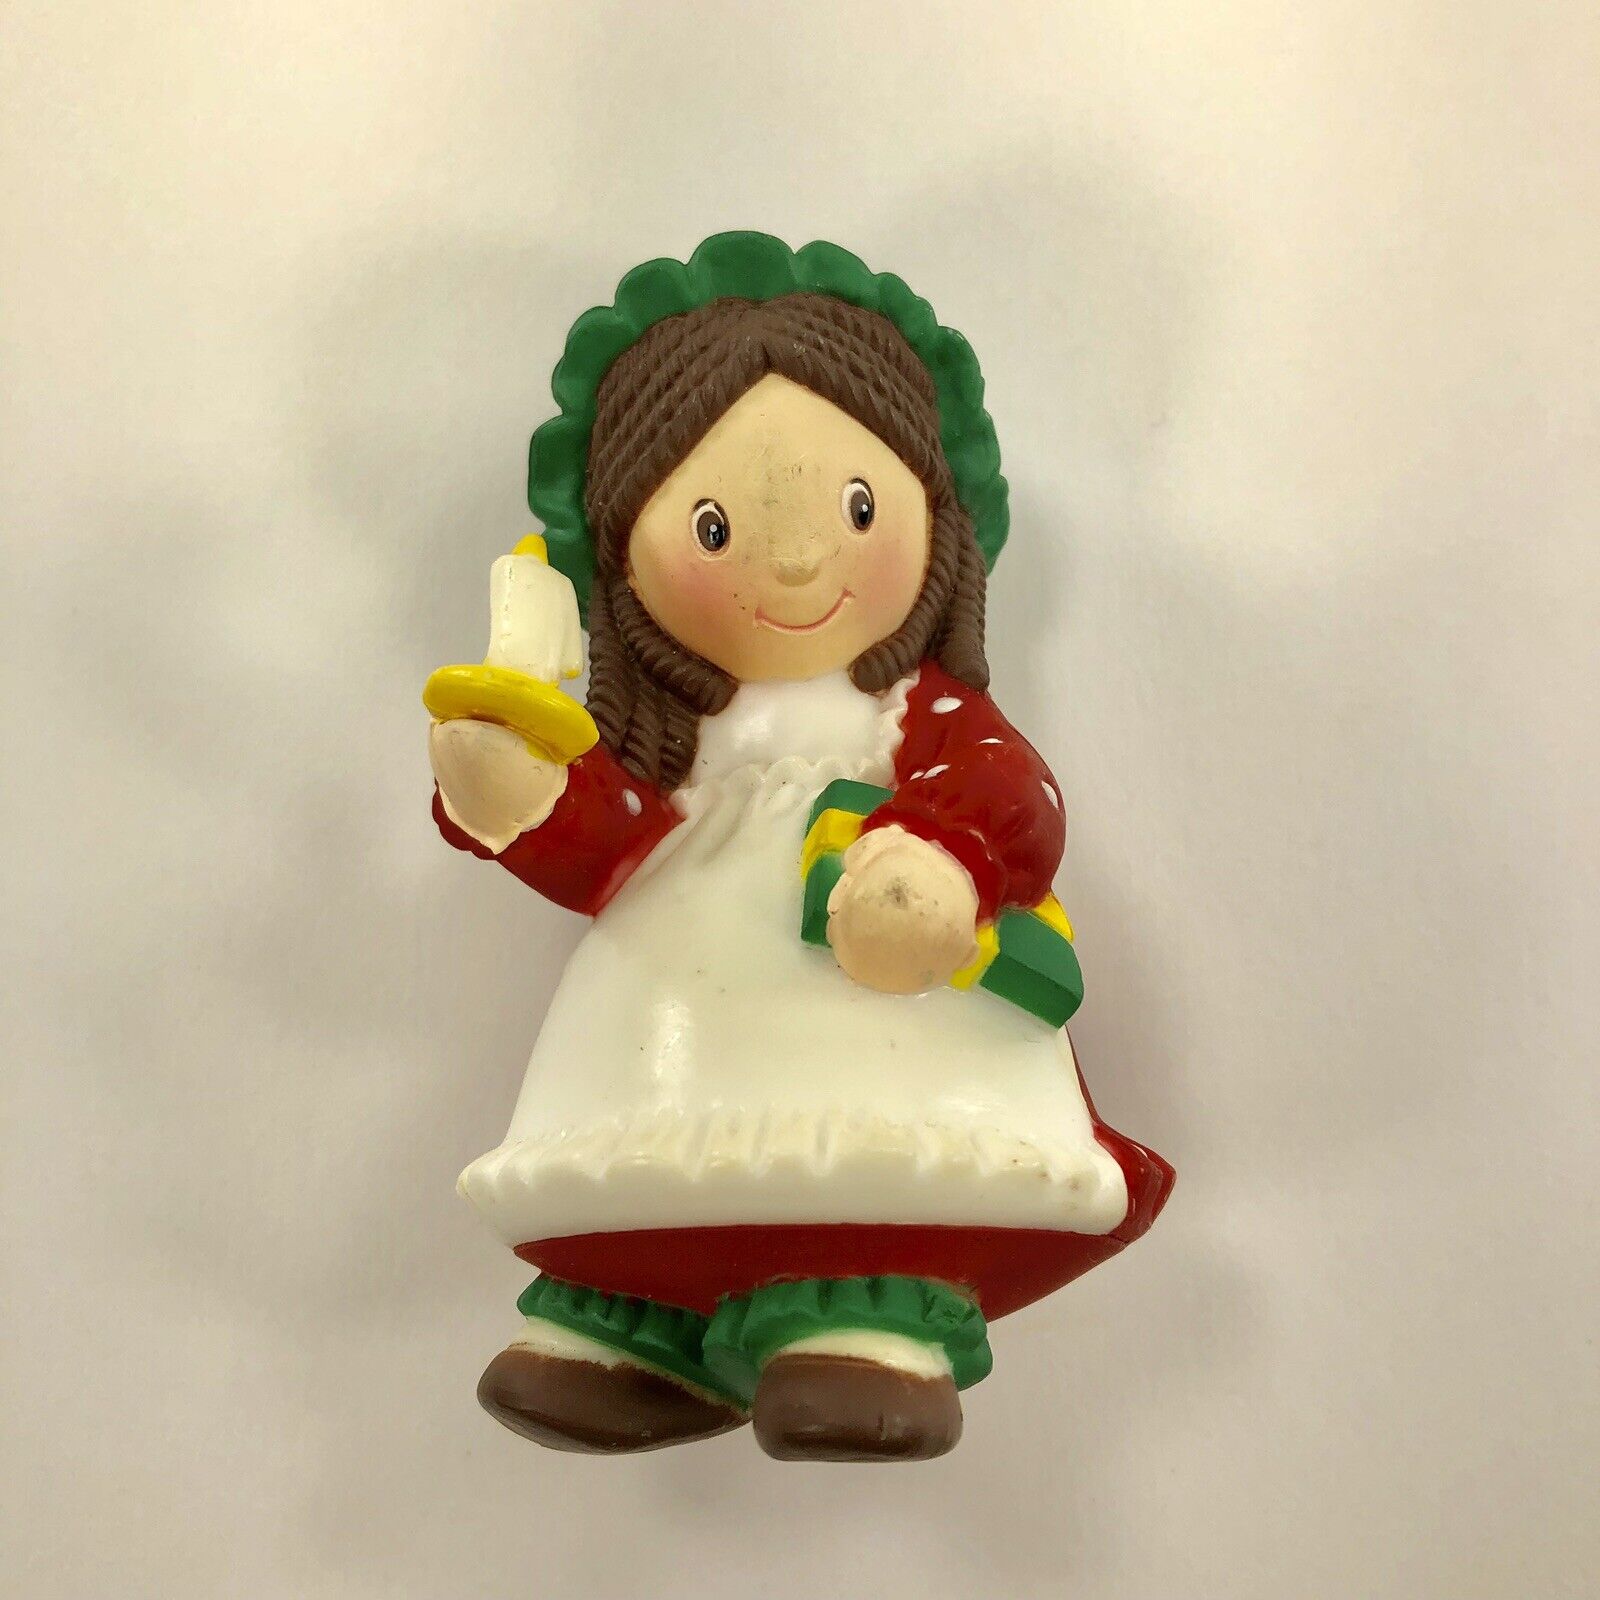 Vtg 1982 Little Girl Holding Candle Ornament American Greetings Plastic